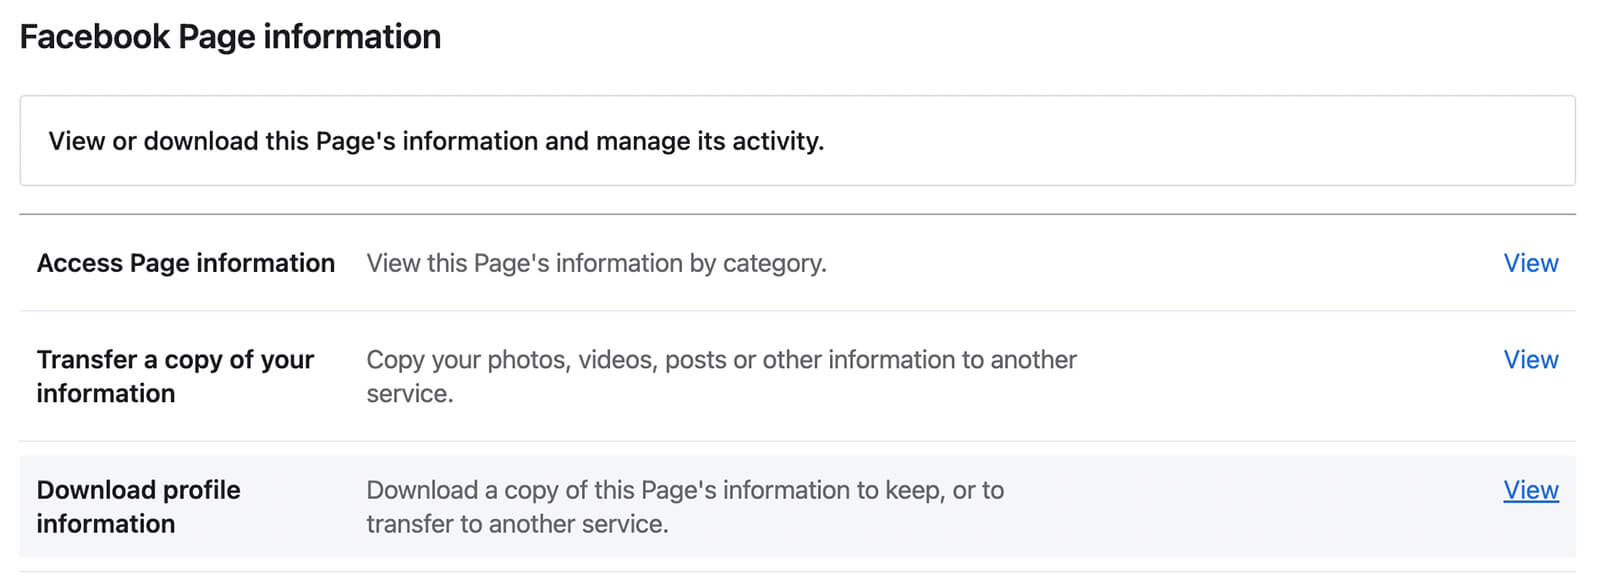 how-to-export-facebook-page-content-export-copy-of-your-page-view-link-next-to-download-profile-information-example-2